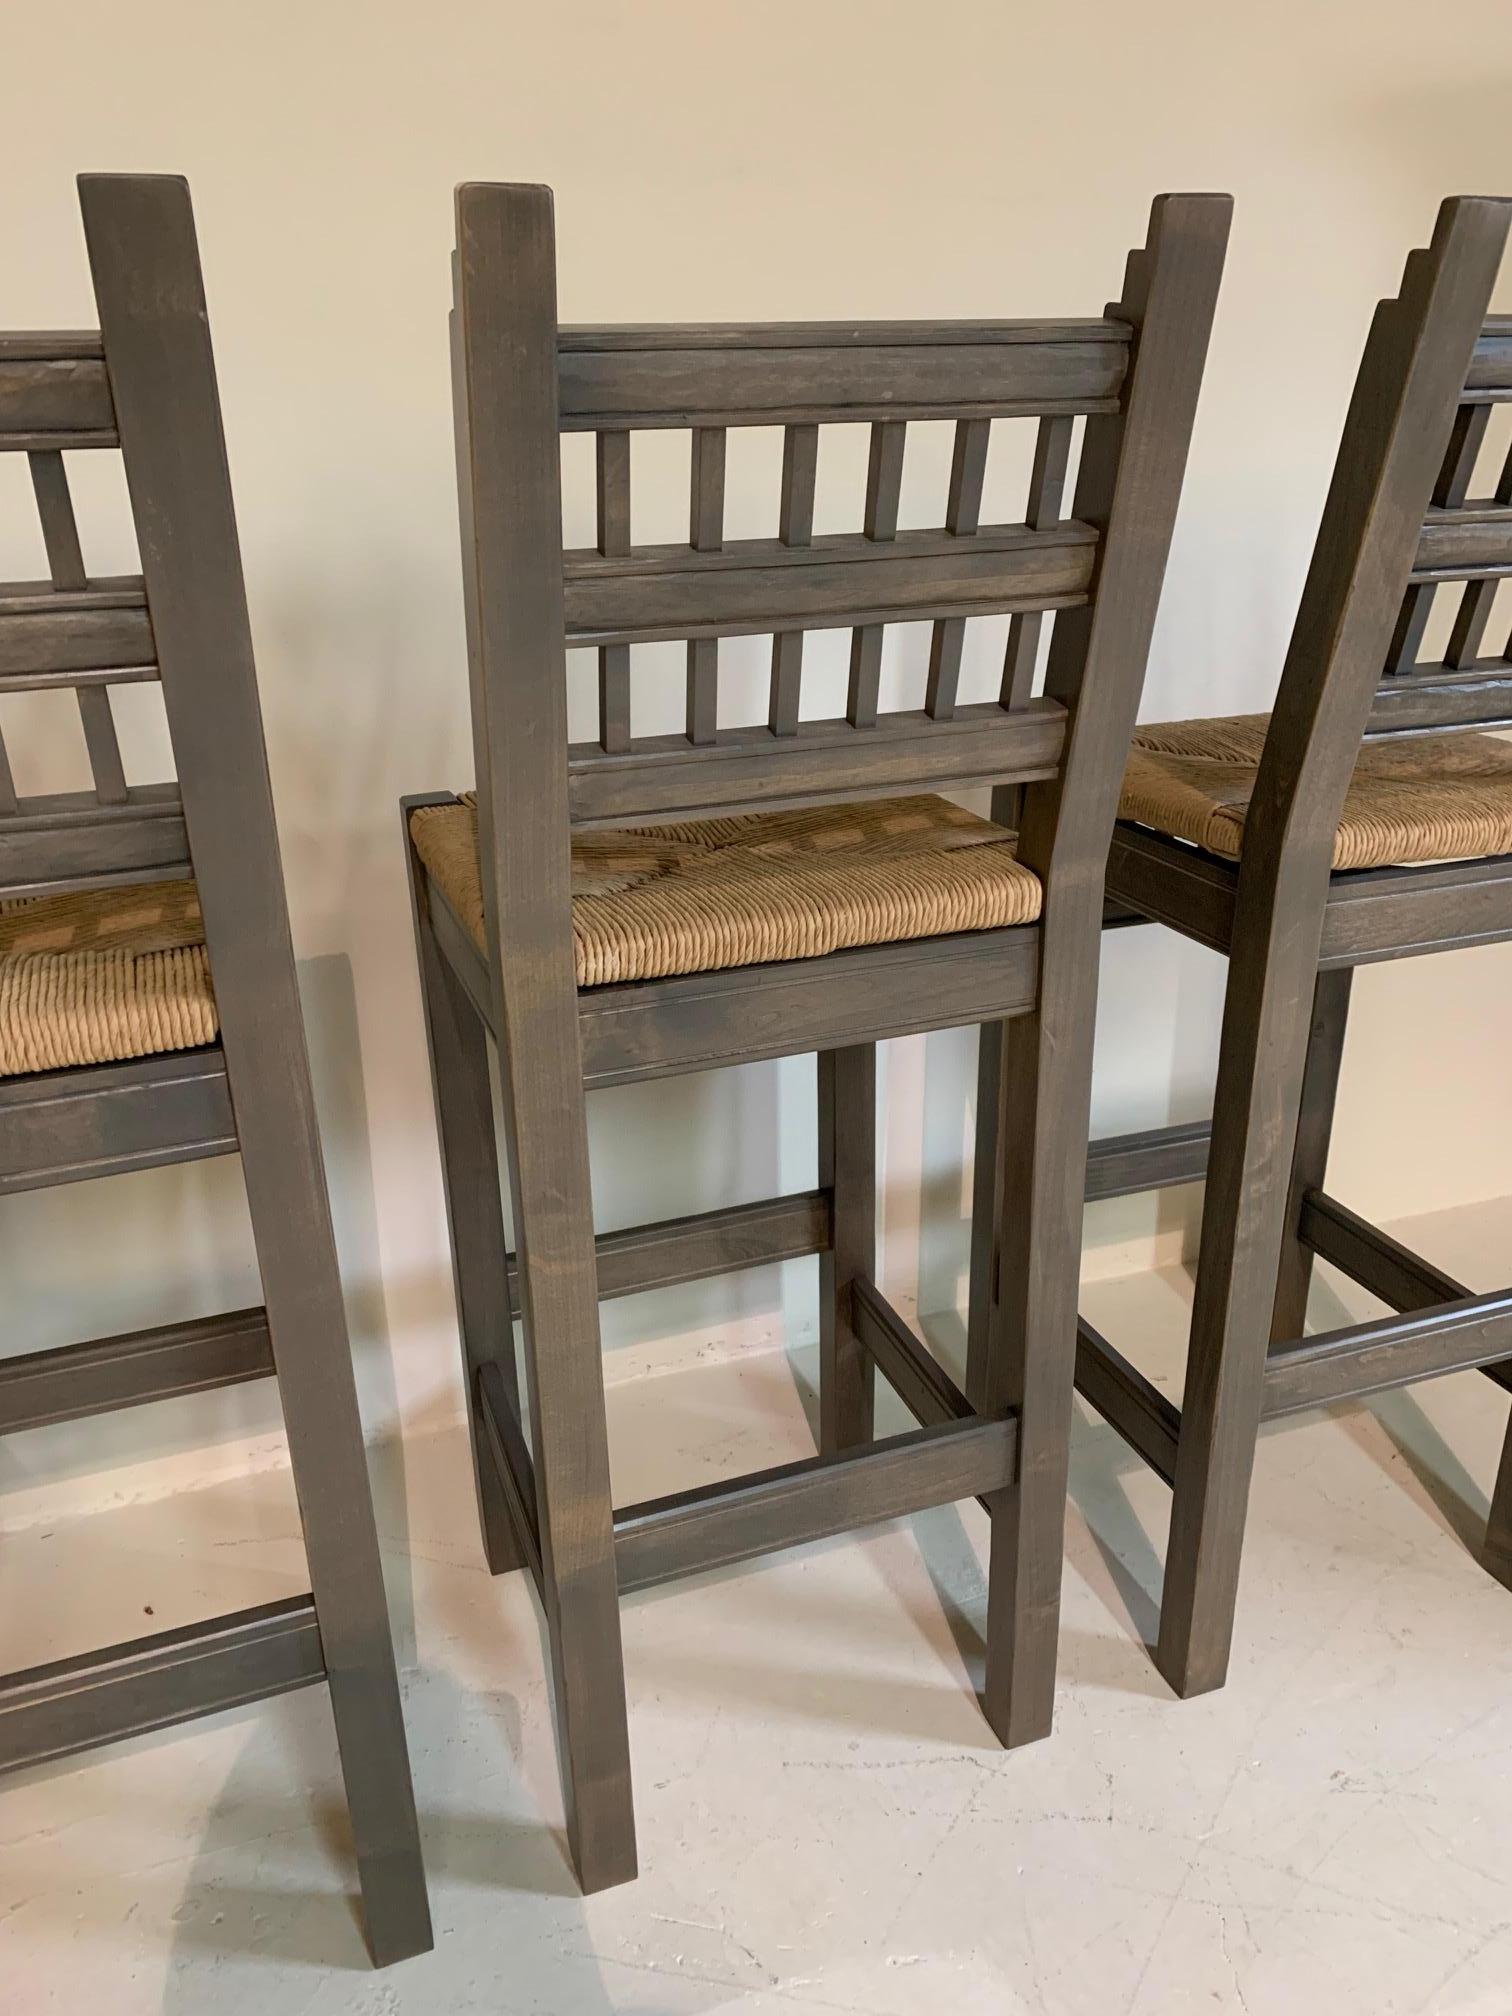 Beautiful barstools in a soft charcoal stain, handcrafted in Albuquerque, New Mexico with rush seats. Sold as a set of 3.3,300